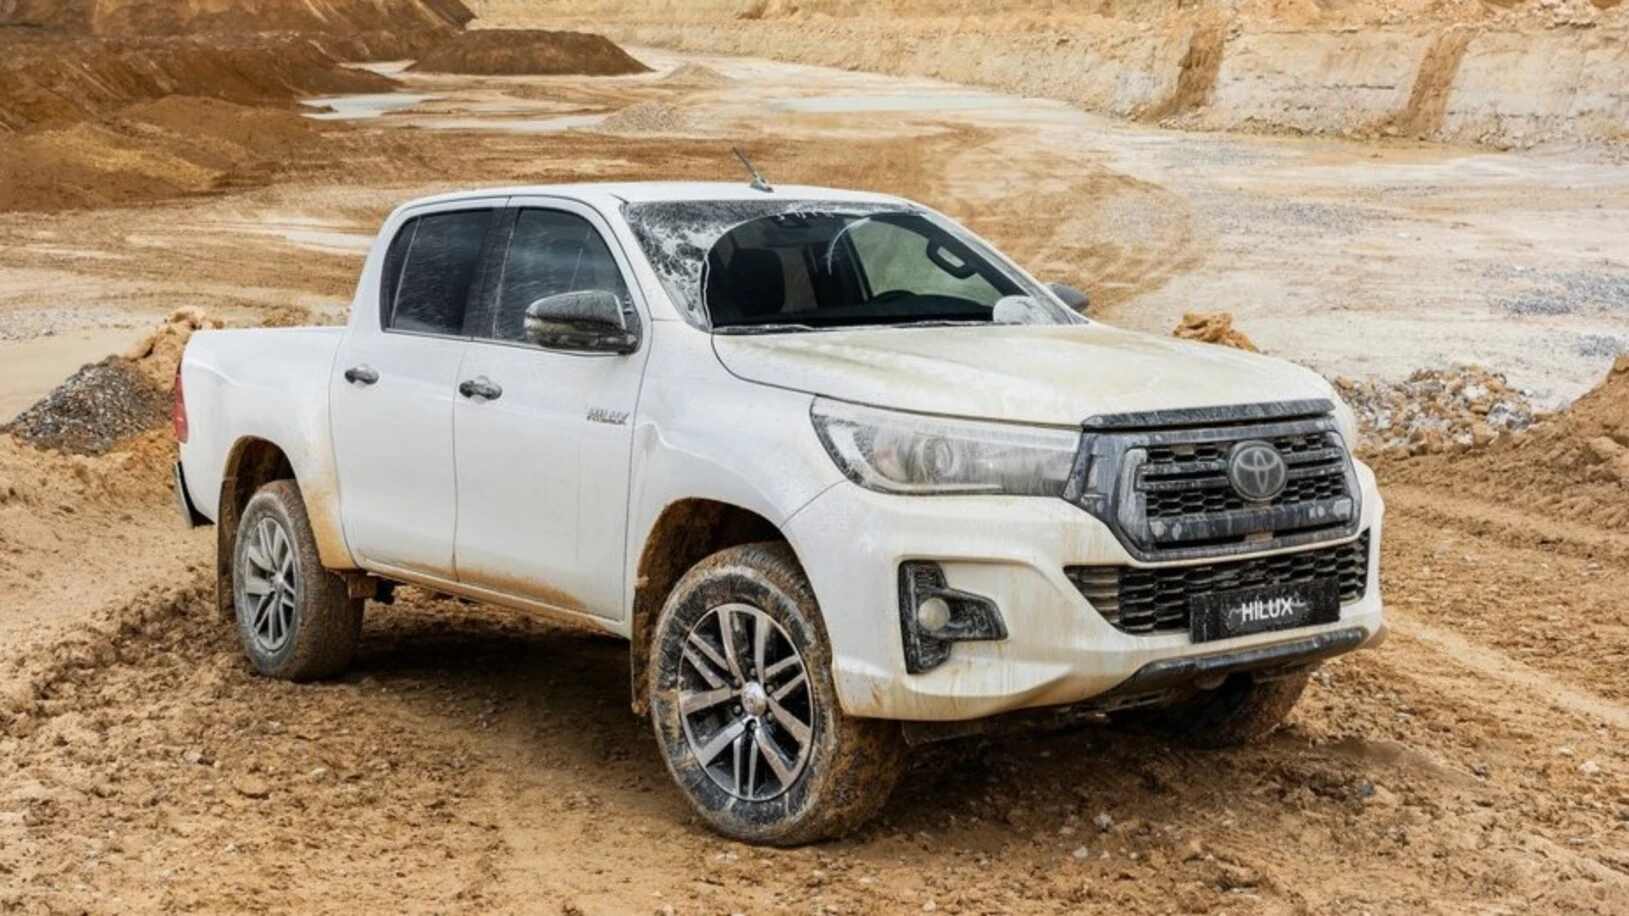 2019 Toyota Hilux Special Edition Image